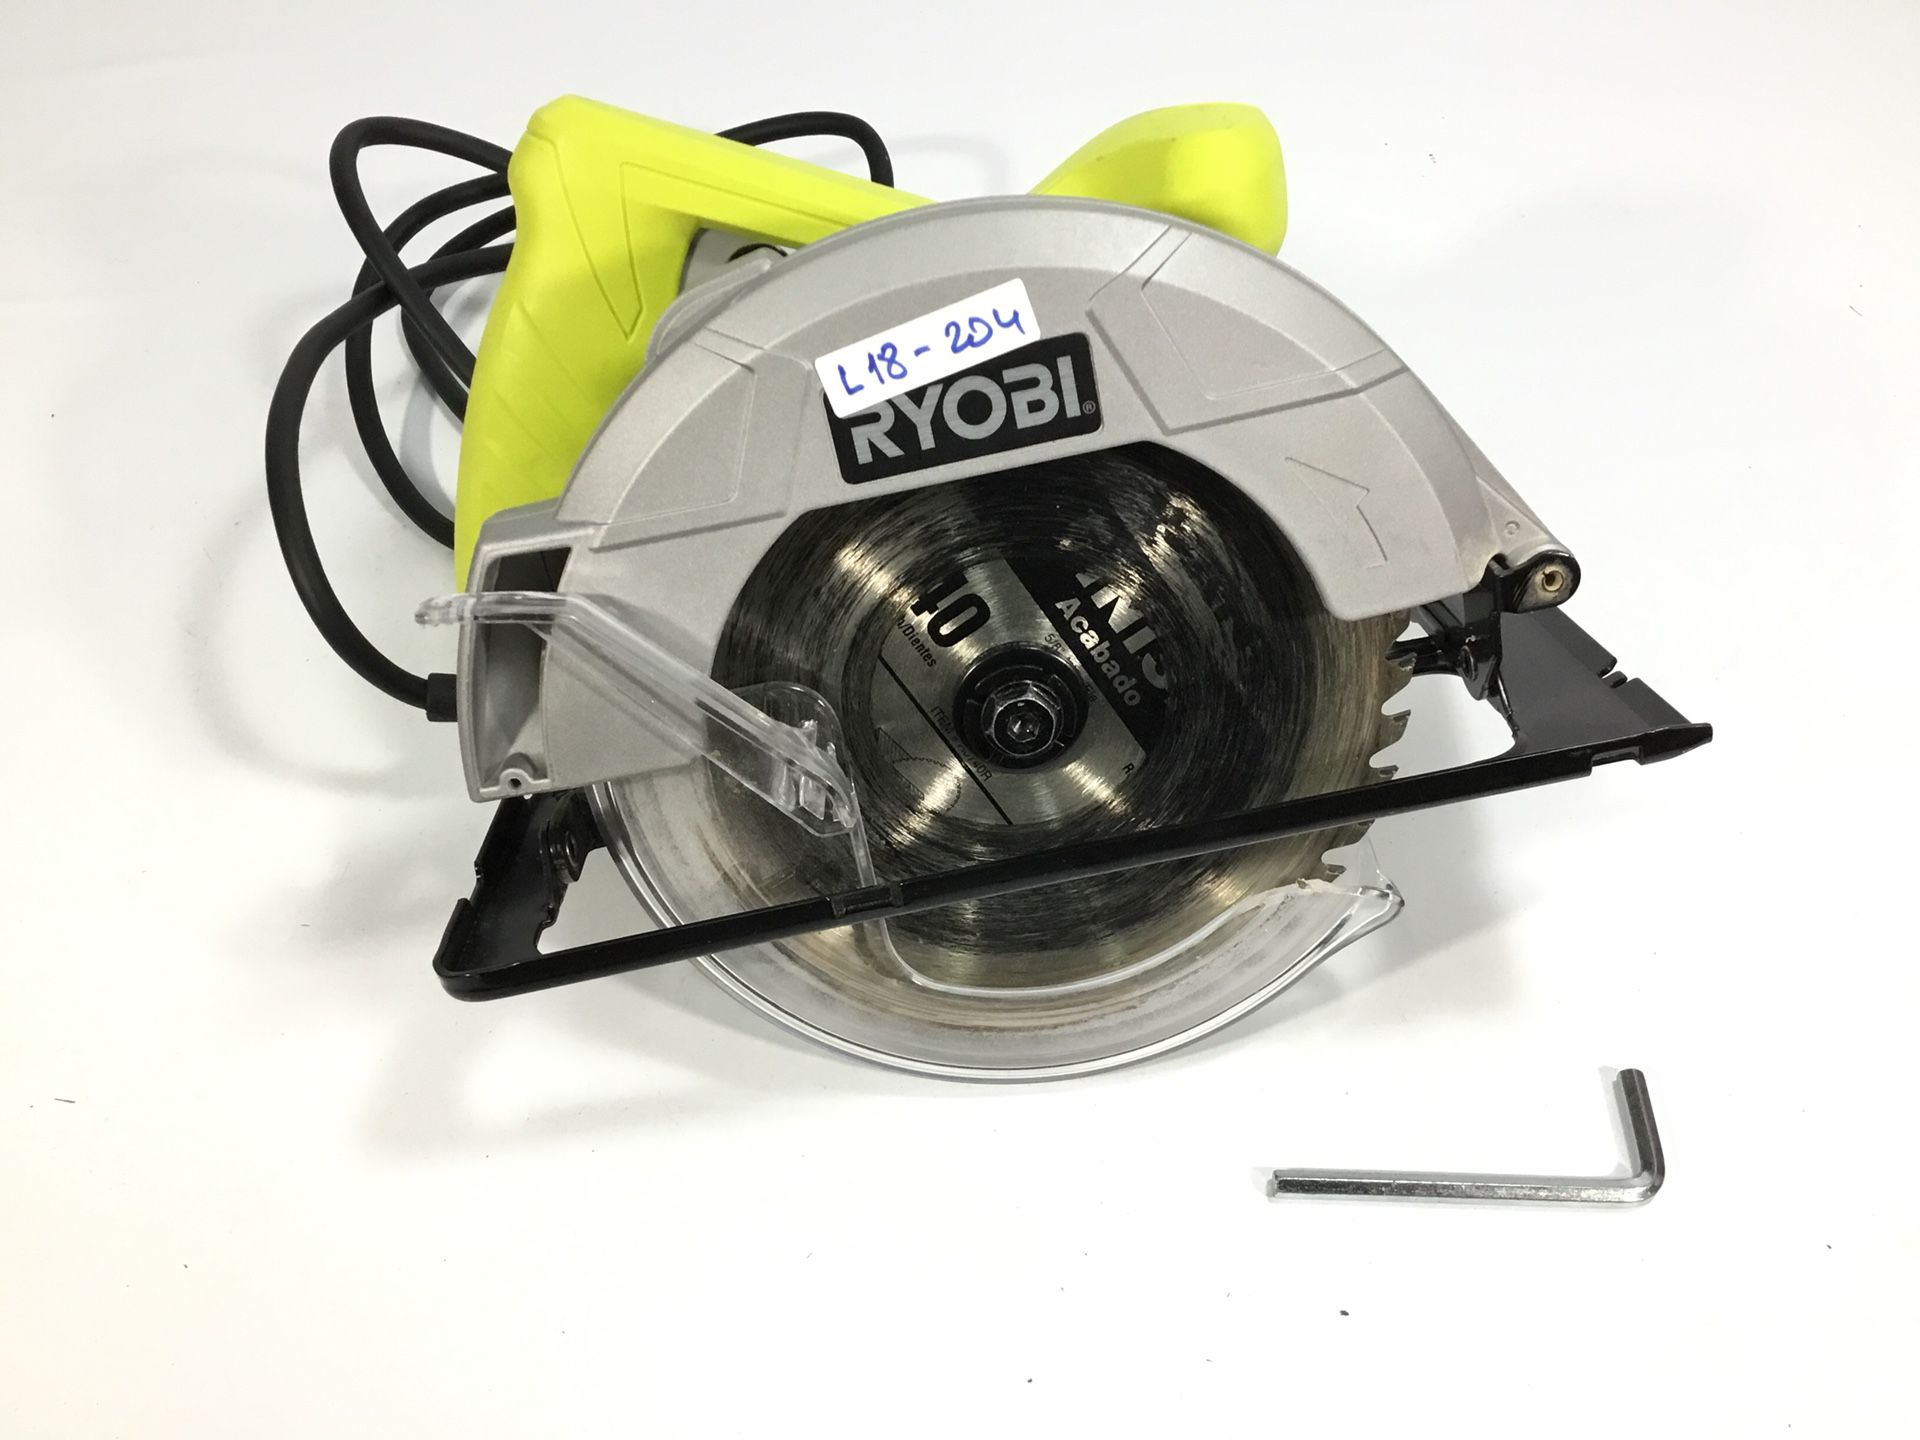 Ryobi CSB125 13-Amp 7-1/4 in. Circular Saw for Sale in Arlington Heights,  IL OfferUp